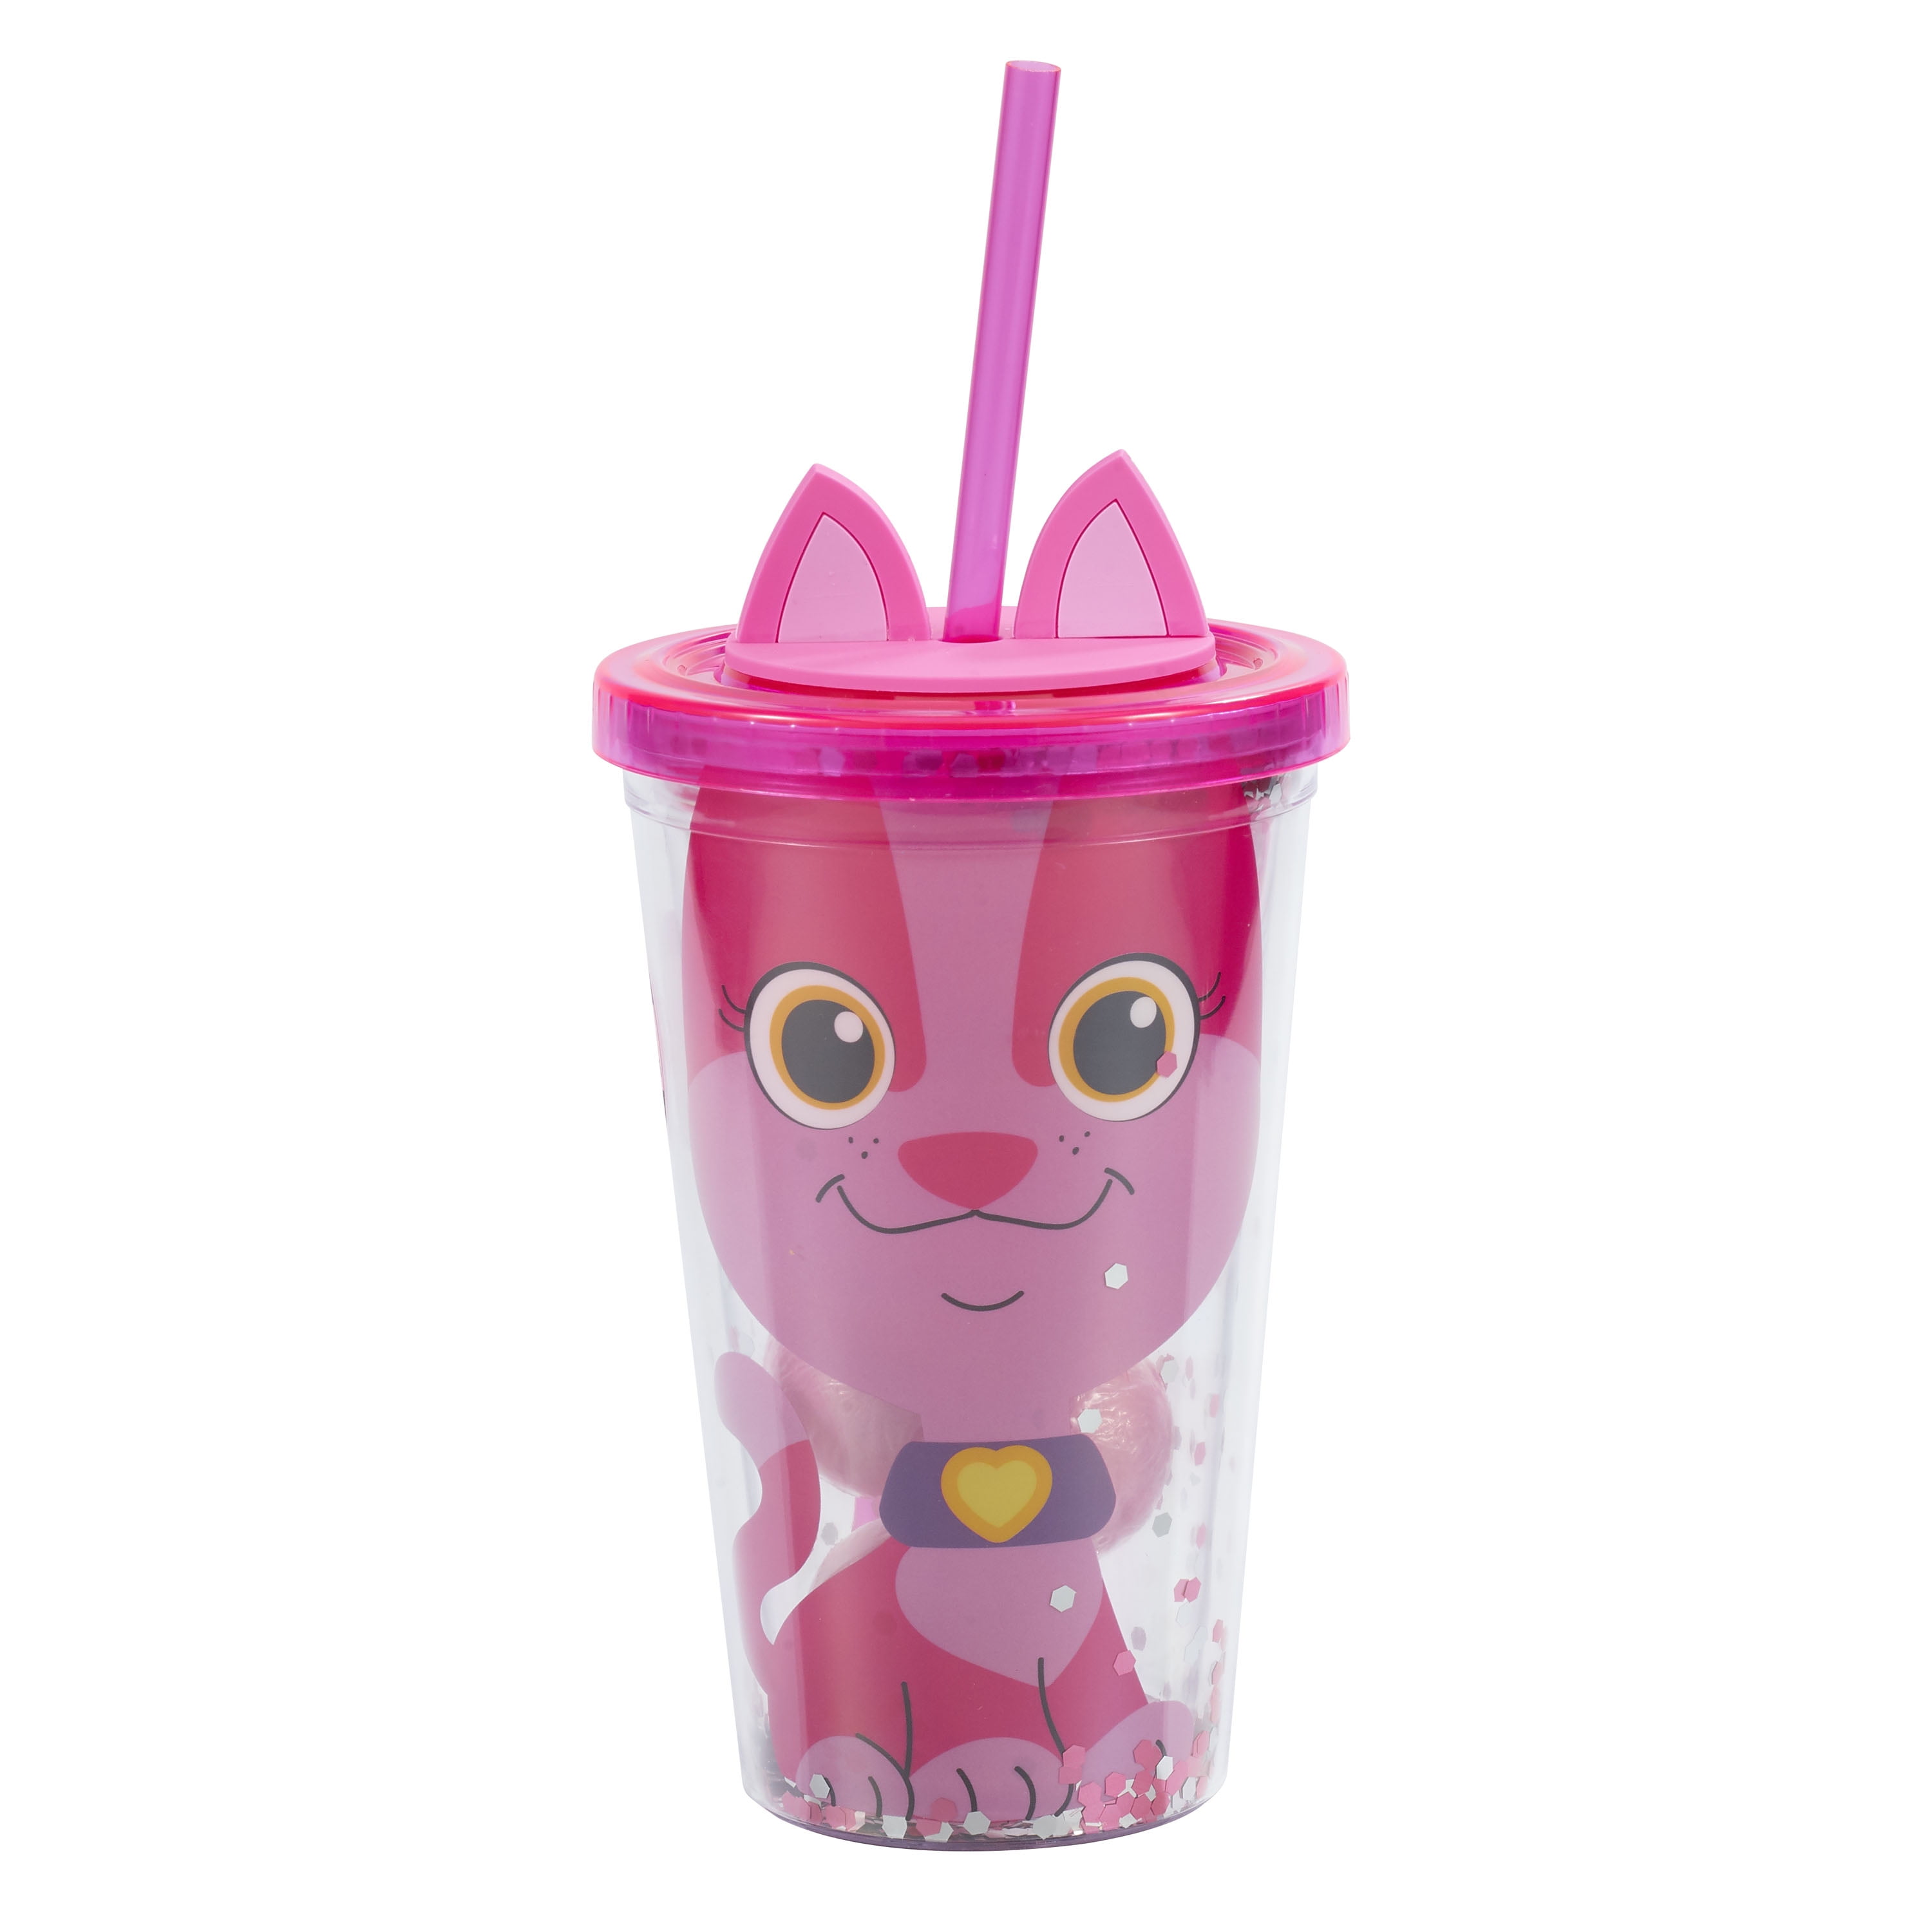 Glamour Cat Ear Tumbler - With Lid and Straw - Gray - Pink - White -  ApolloBox